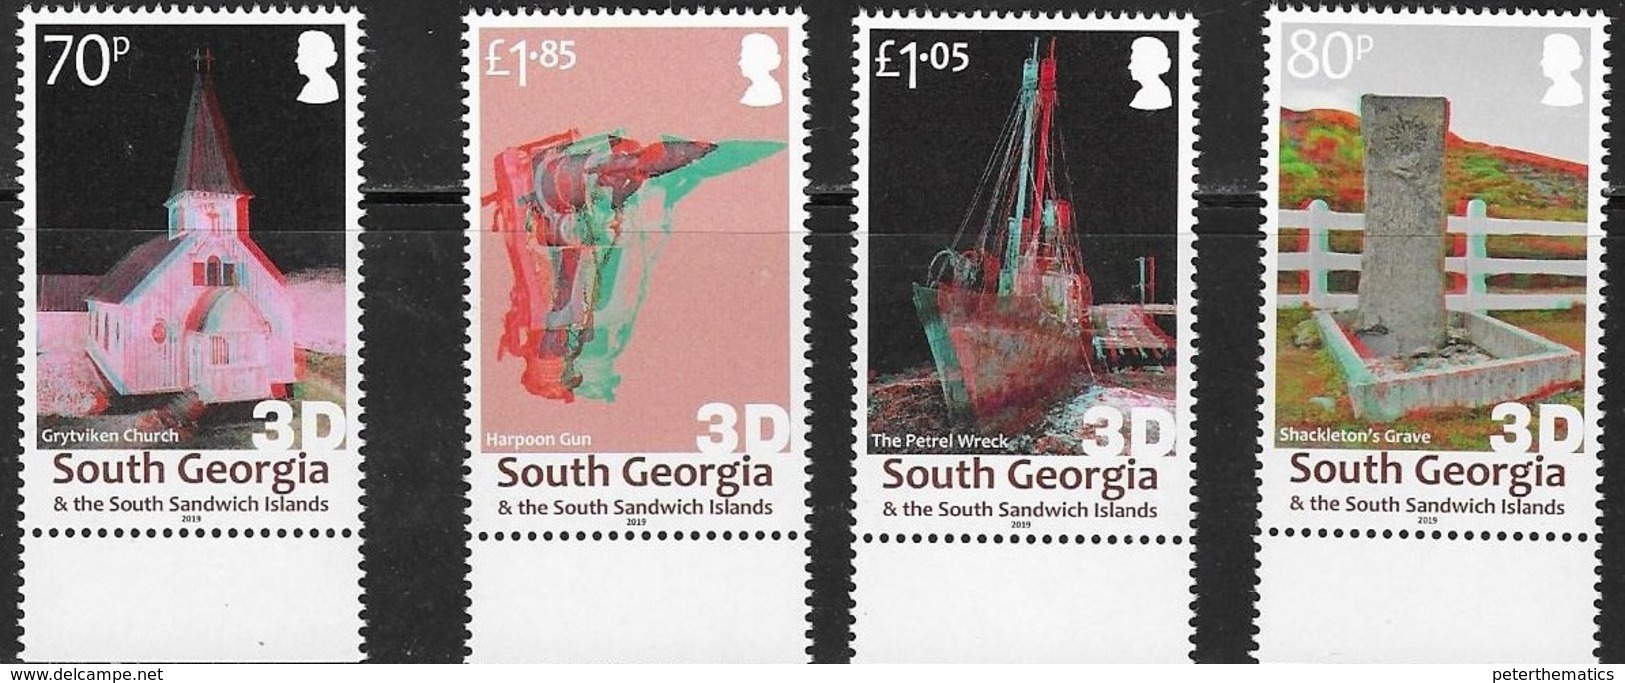 SOUTH GEORGIA, 2019, MNH, 3D STAMPS, CHURCHES, SHIPS, WHALING, HARPOONS, SHACKLETON'S GRAVE,4v - Chiese E Cattedrali